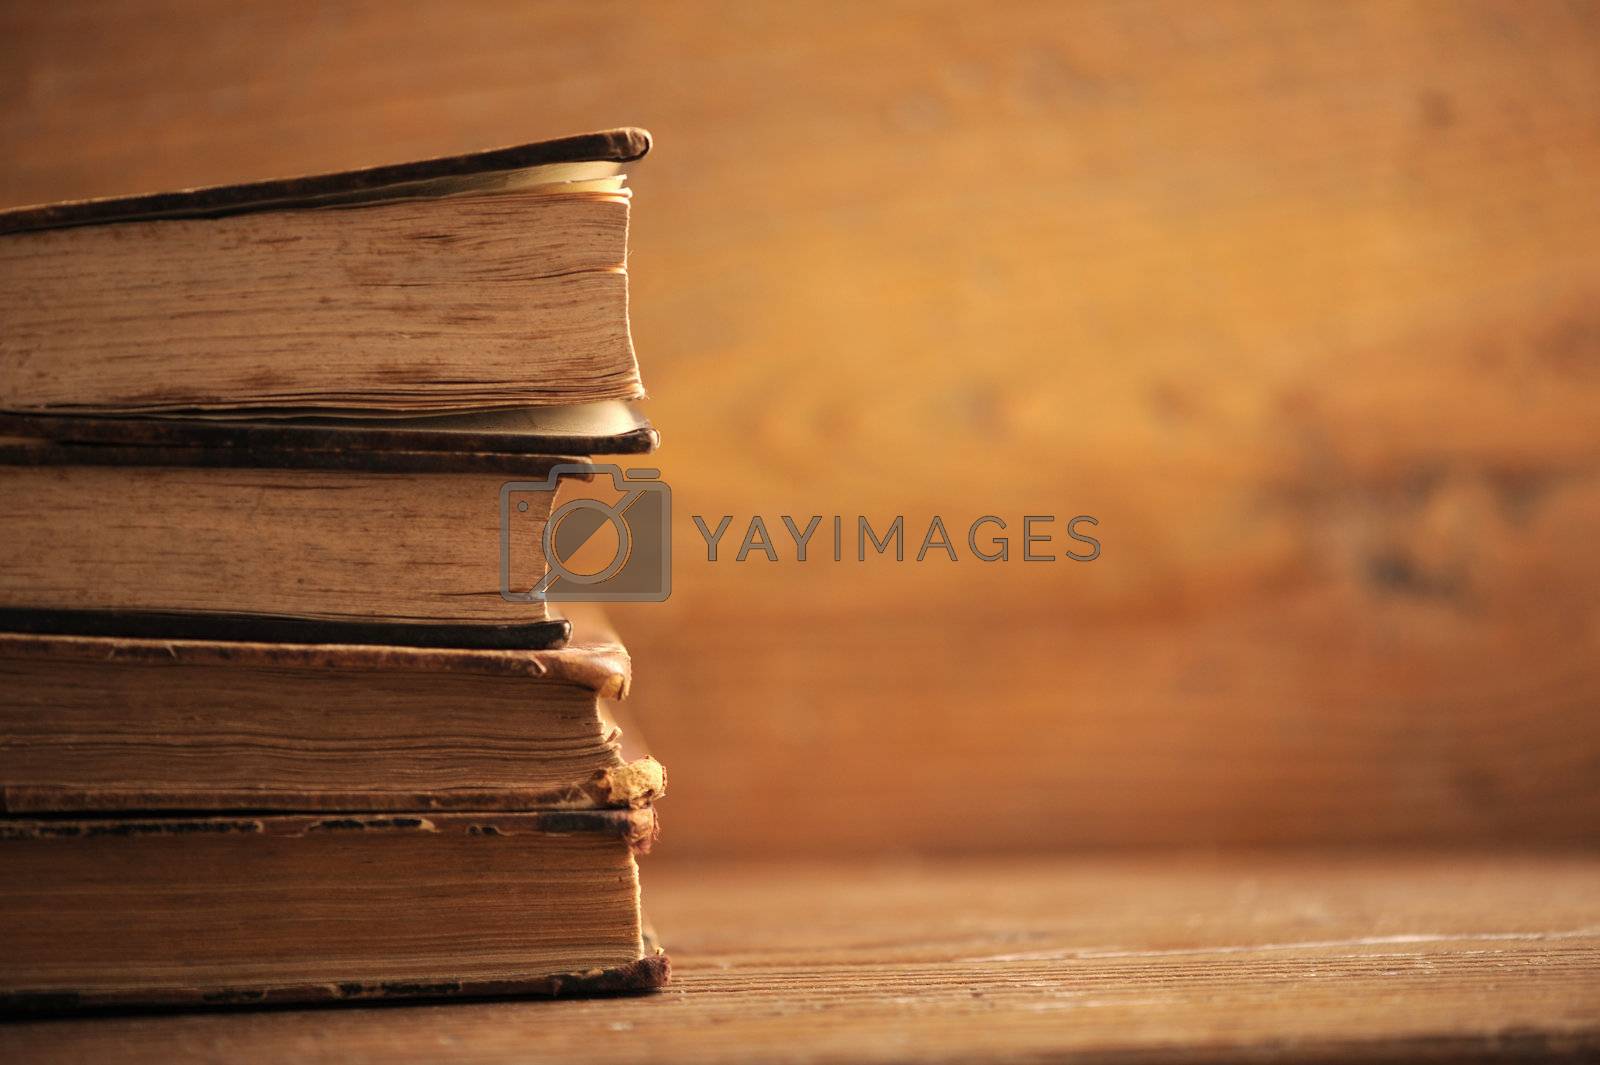 Royalty free image of old book close up by stokkete